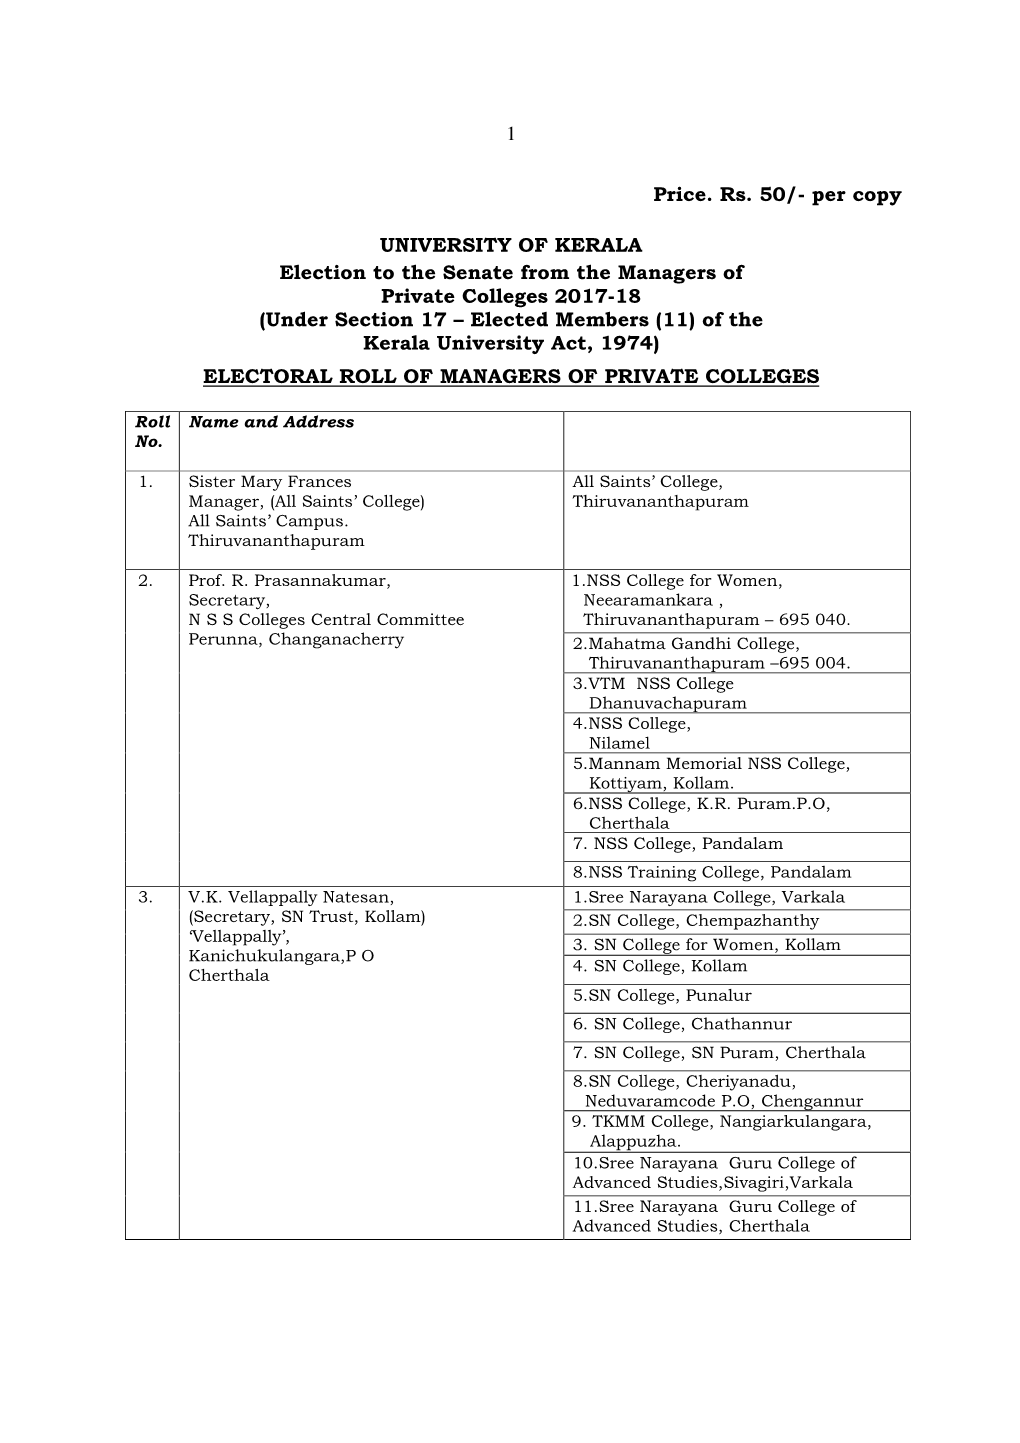 Managers of Private Colleges 2017-18 (Under Section 17 – Elected Members (11) of the Kerala University Act, 1974)